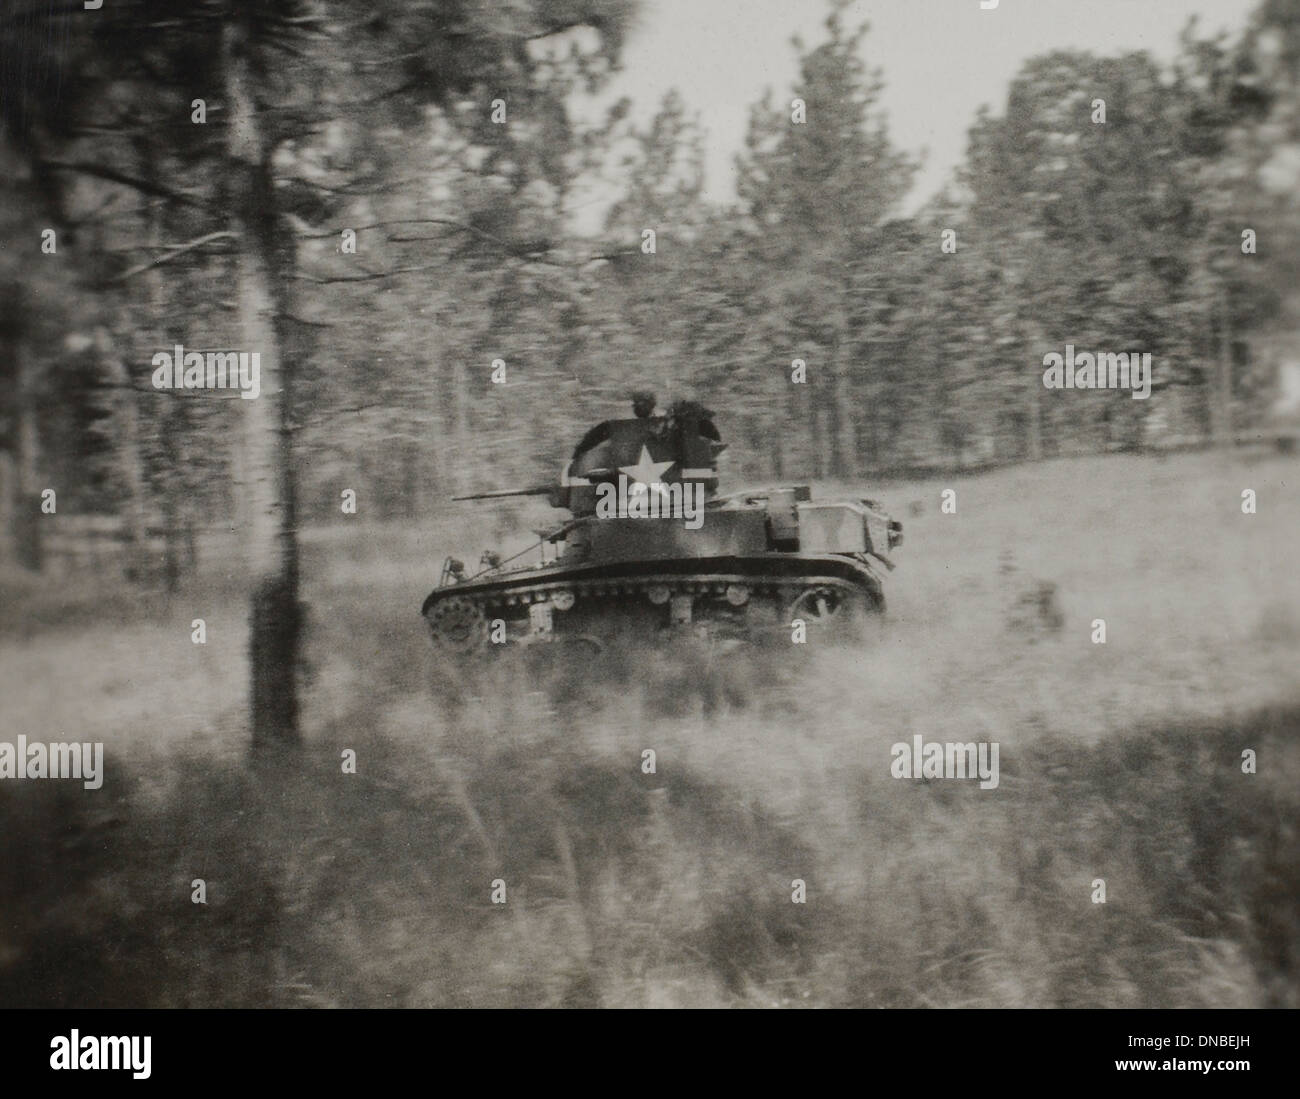 Tank Training and Target Practice, WWII, HQ 2nd Battalion, 389th Infantry, US Army military base, Indiana, USA, 1942 Stock Photo